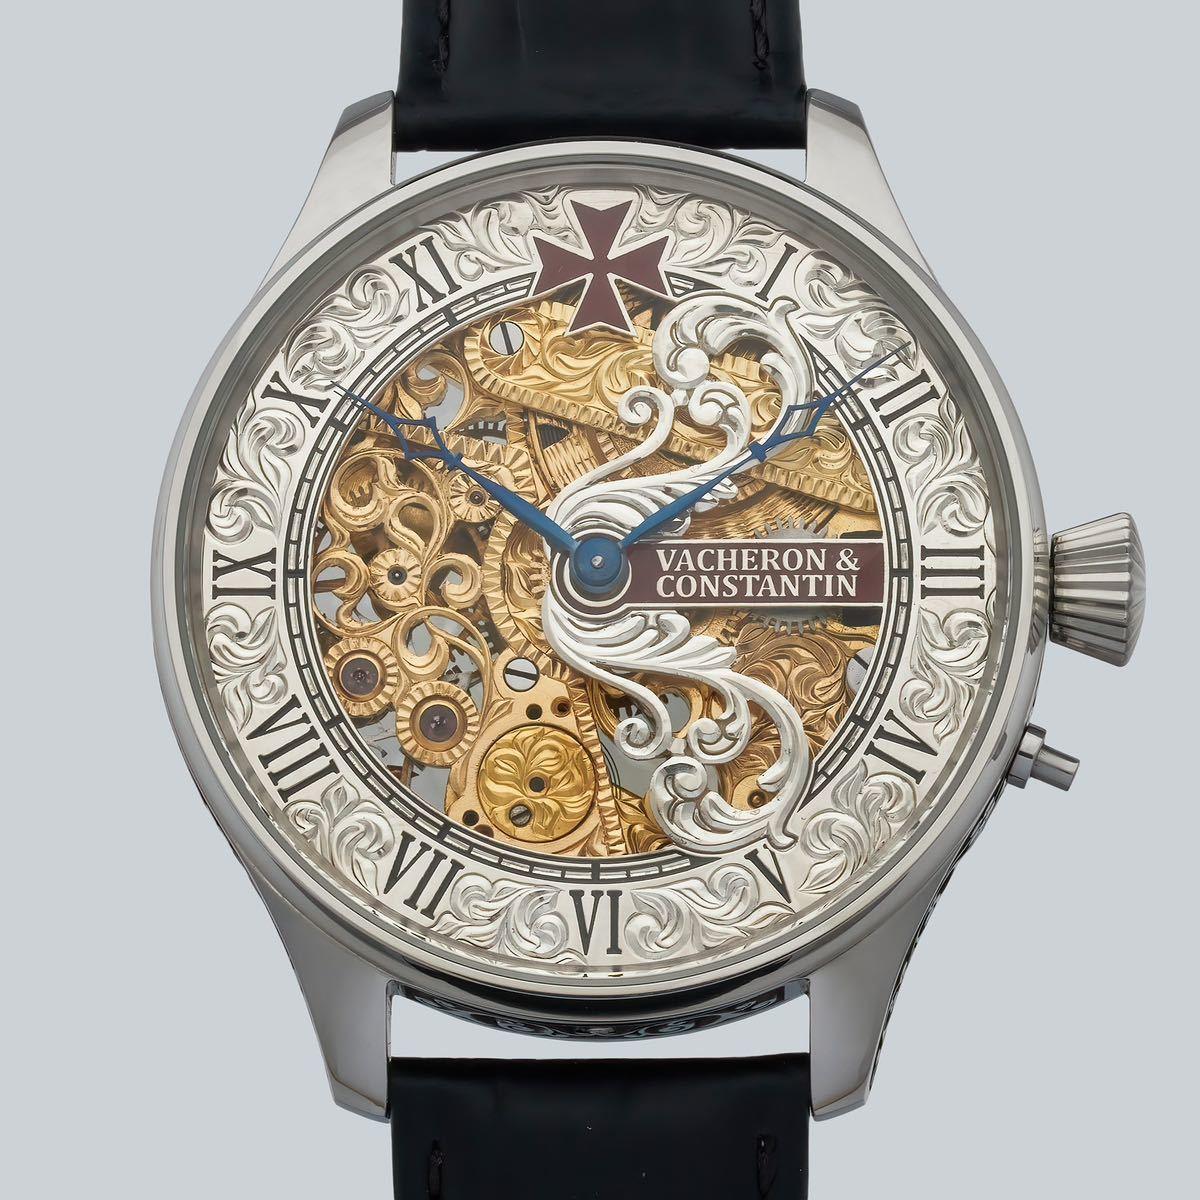 48mm Silver Dial Leather Band Watch Inspired By Vintage Vacheron & Constantin Pocket Watches - Murphy Johnson Watches Co.